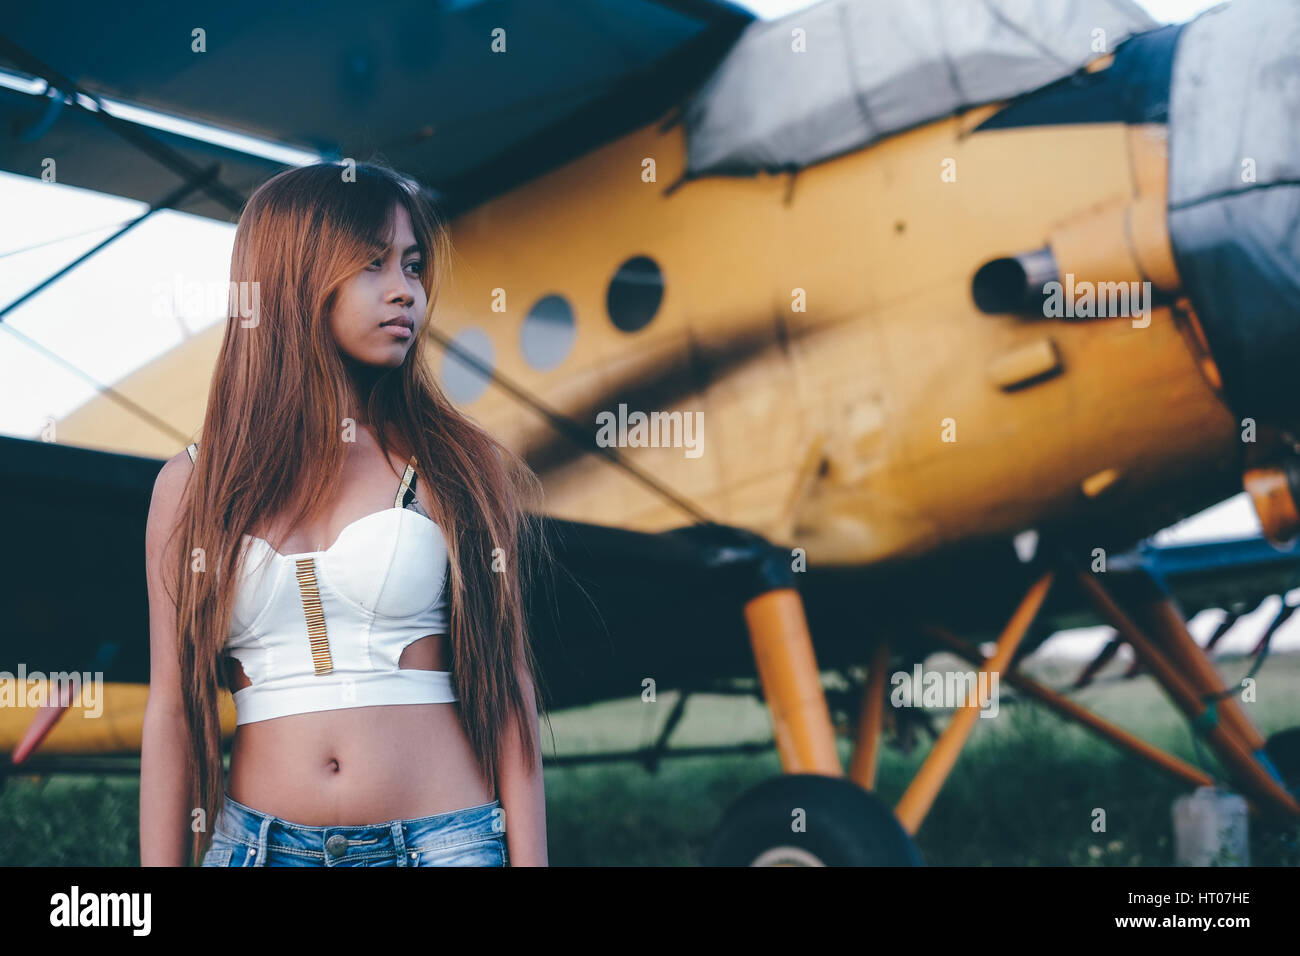 Beautiful female portrait on the airfield,late afternoon Stock Photo